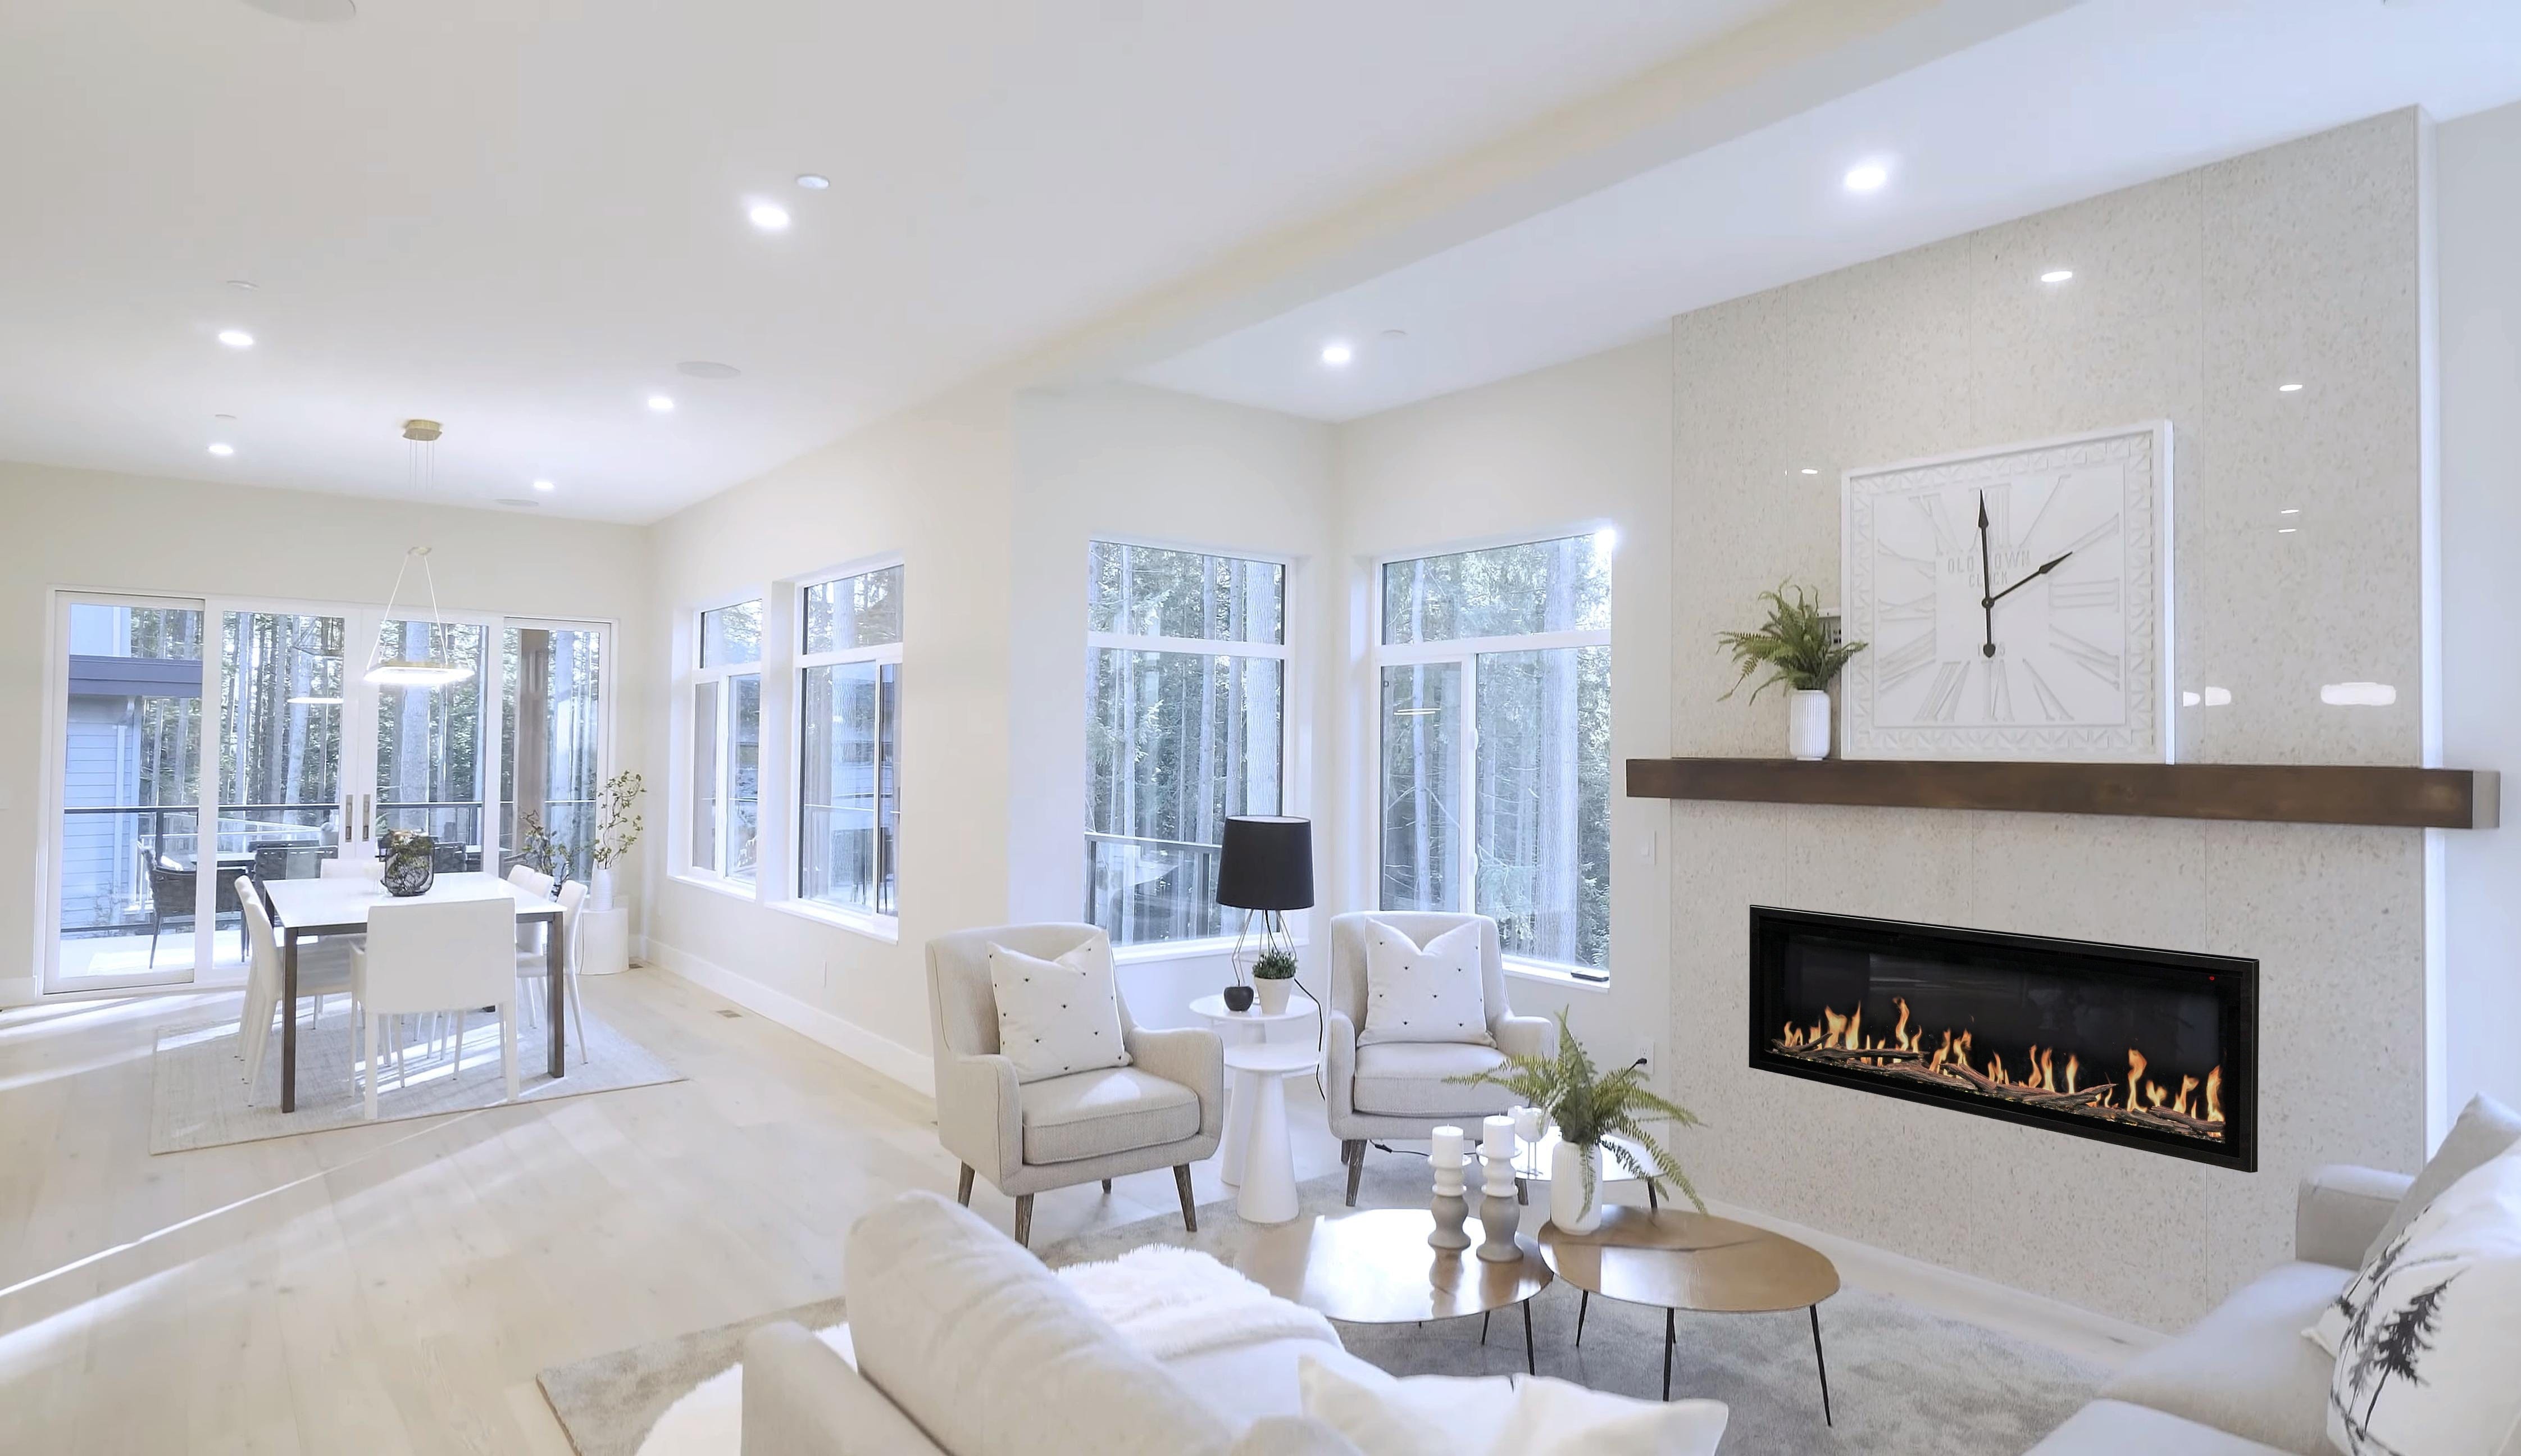 Modern Flames Orion Slim Fireplace with Living Area View and Dining on Right